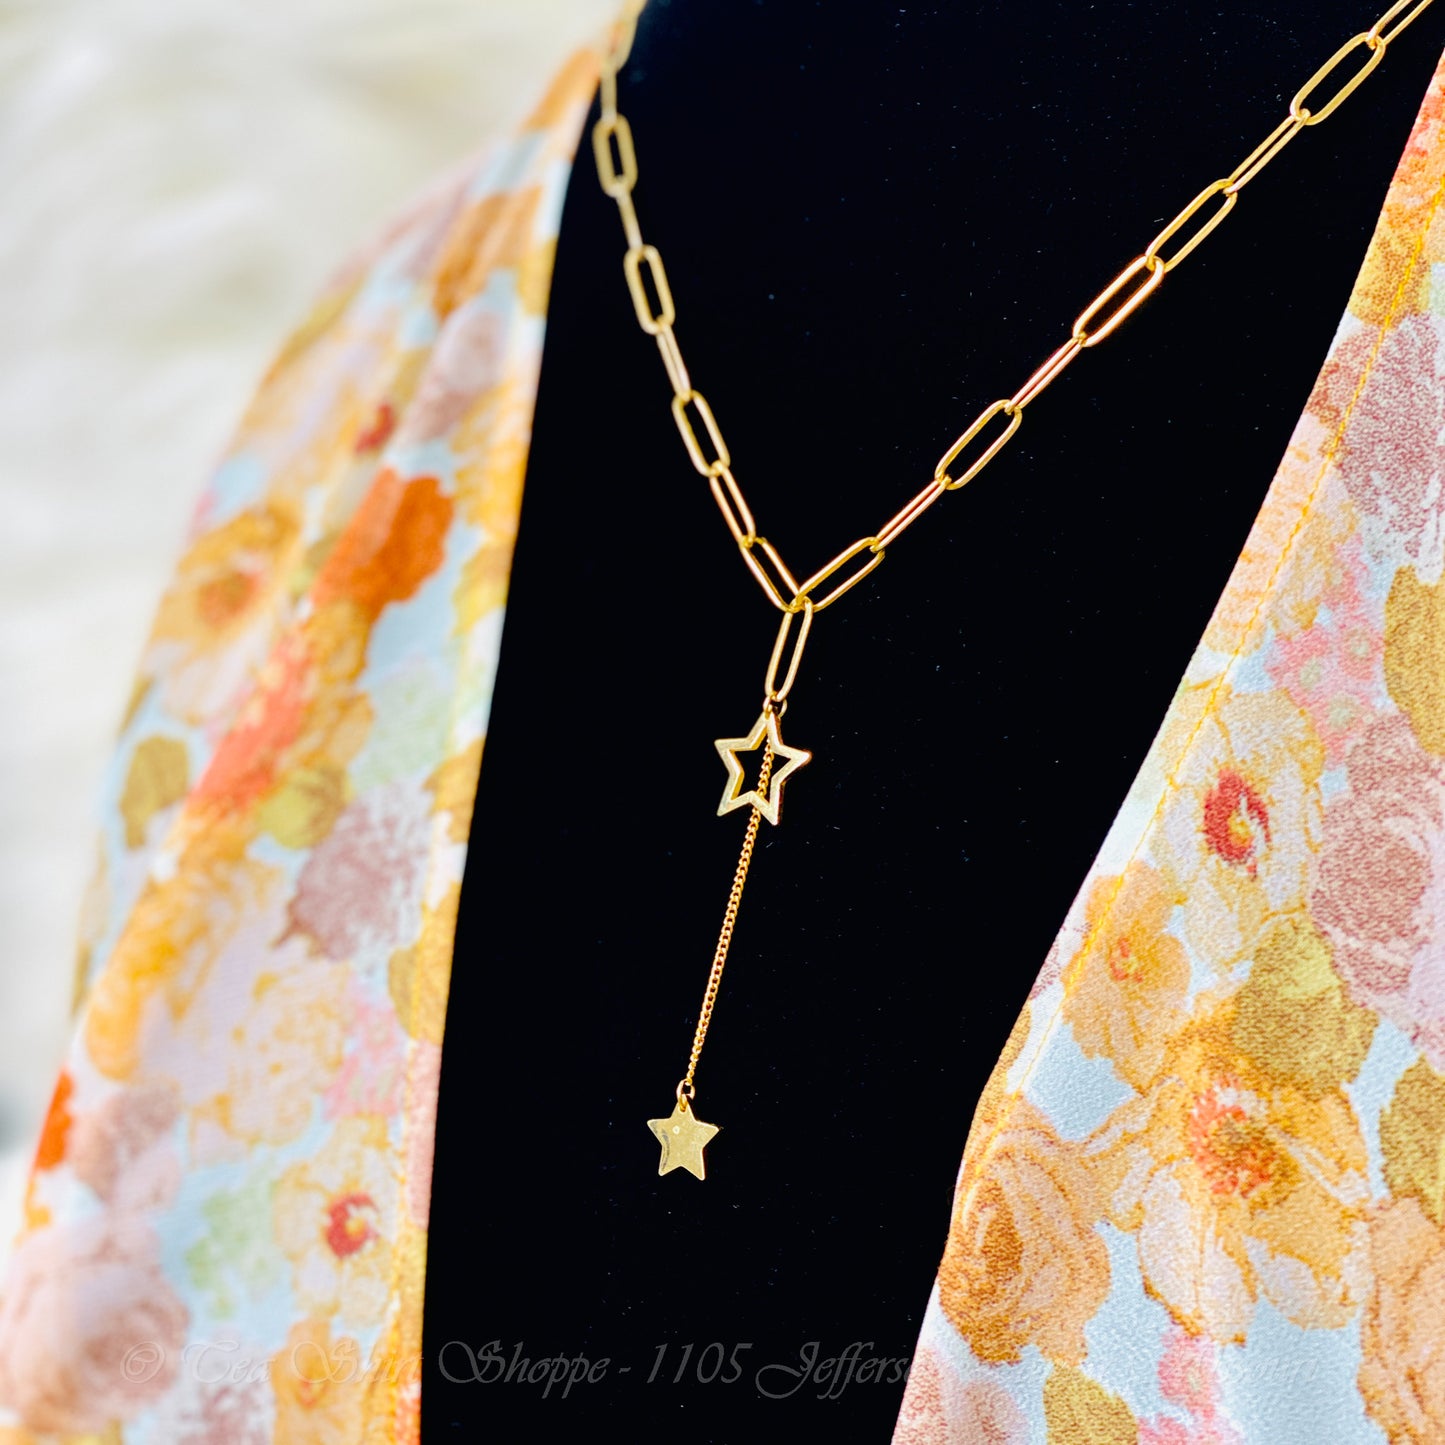 Dainty, but sure to be noticed! 14kt Gold Plated Necklace